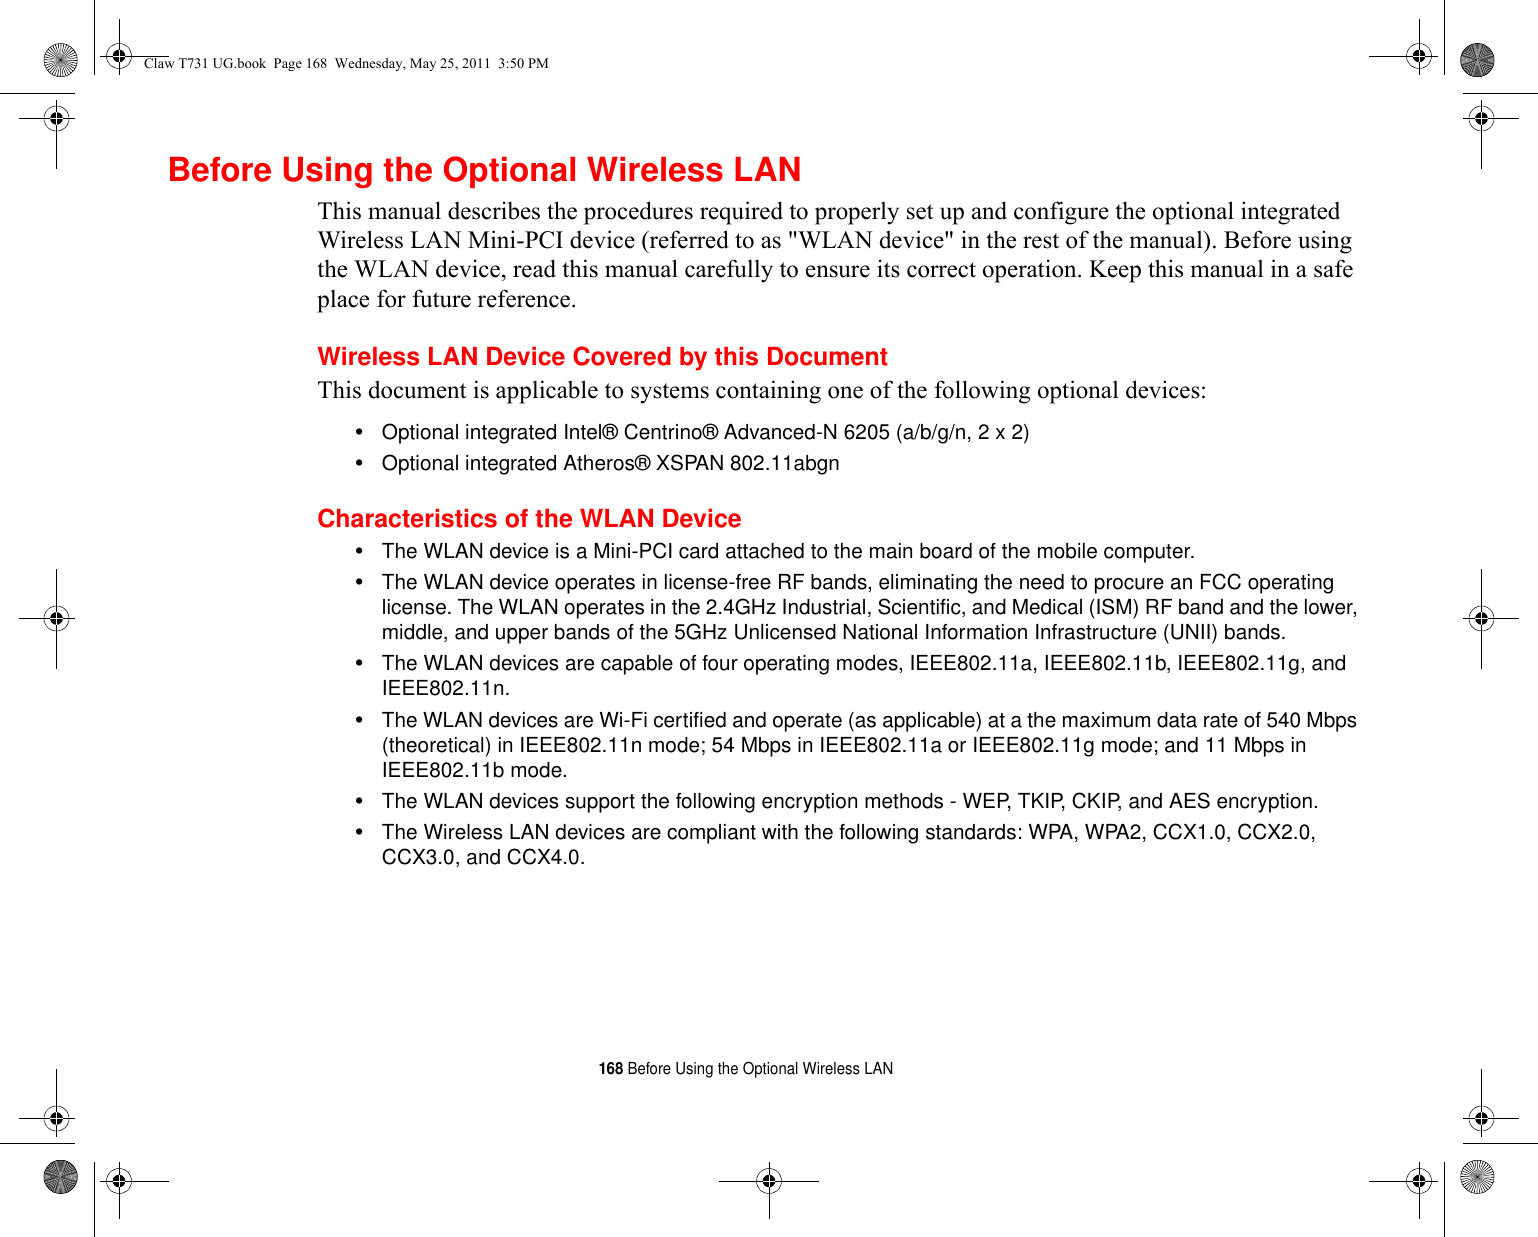 168 Before Using the Optional Wireless LANBefore Using the Optional Wireless LANThis manual describes the procedures required to properly set up and configure the optional integrated Wireless LAN Mini-PCI device (referred to as &quot;WLAN device&quot; in the rest of the manual). Before using the WLAN device, read this manual carefully to ensure its correct operation. Keep this manual in a safe place for future reference.Wireless LAN Device Covered by this DocumentThis document is applicable to systems containing one of the following optional devices:•Optional integrated Intel® Centrino® Advanced-N 6205 (a/b/g/n, 2 x 2)•Optional integrated Atheros® XSPAN 802.11abgnCharacteristics of the WLAN Device•The WLAN device is a Mini-PCI card attached to the main board of the mobile computer. •The WLAN device operates in license-free RF bands, eliminating the need to procure an FCC operating license. The WLAN operates in the 2.4GHz Industrial, Scientific, and Medical (ISM) RF band and the lower, middle, and upper bands of the 5GHz Unlicensed National Information Infrastructure (UNII) bands. •The WLAN devices are capable of four operating modes, IEEE802.11a, IEEE802.11b, IEEE802.11g, and IEEE802.11n.•The WLAN devices are Wi-Fi certified and operate (as applicable) at a the maximum data rate of 540 Mbps (theoretical) in IEEE802.11n mode; 54 Mbps in IEEE802.11a or IEEE802.11g mode; and 11 Mbps in IEEE802.11b mode.•The WLAN devices support the following encryption methods - WEP, TKIP, CKIP, and AES encryption.•The Wireless LAN devices are compliant with the following standards: WPA, WPA2, CCX1.0, CCX2.0, CCX3.0, and CCX4.0.Claw T731 UG.book  Page 168  Wednesday, May 25, 2011  3:50 PM